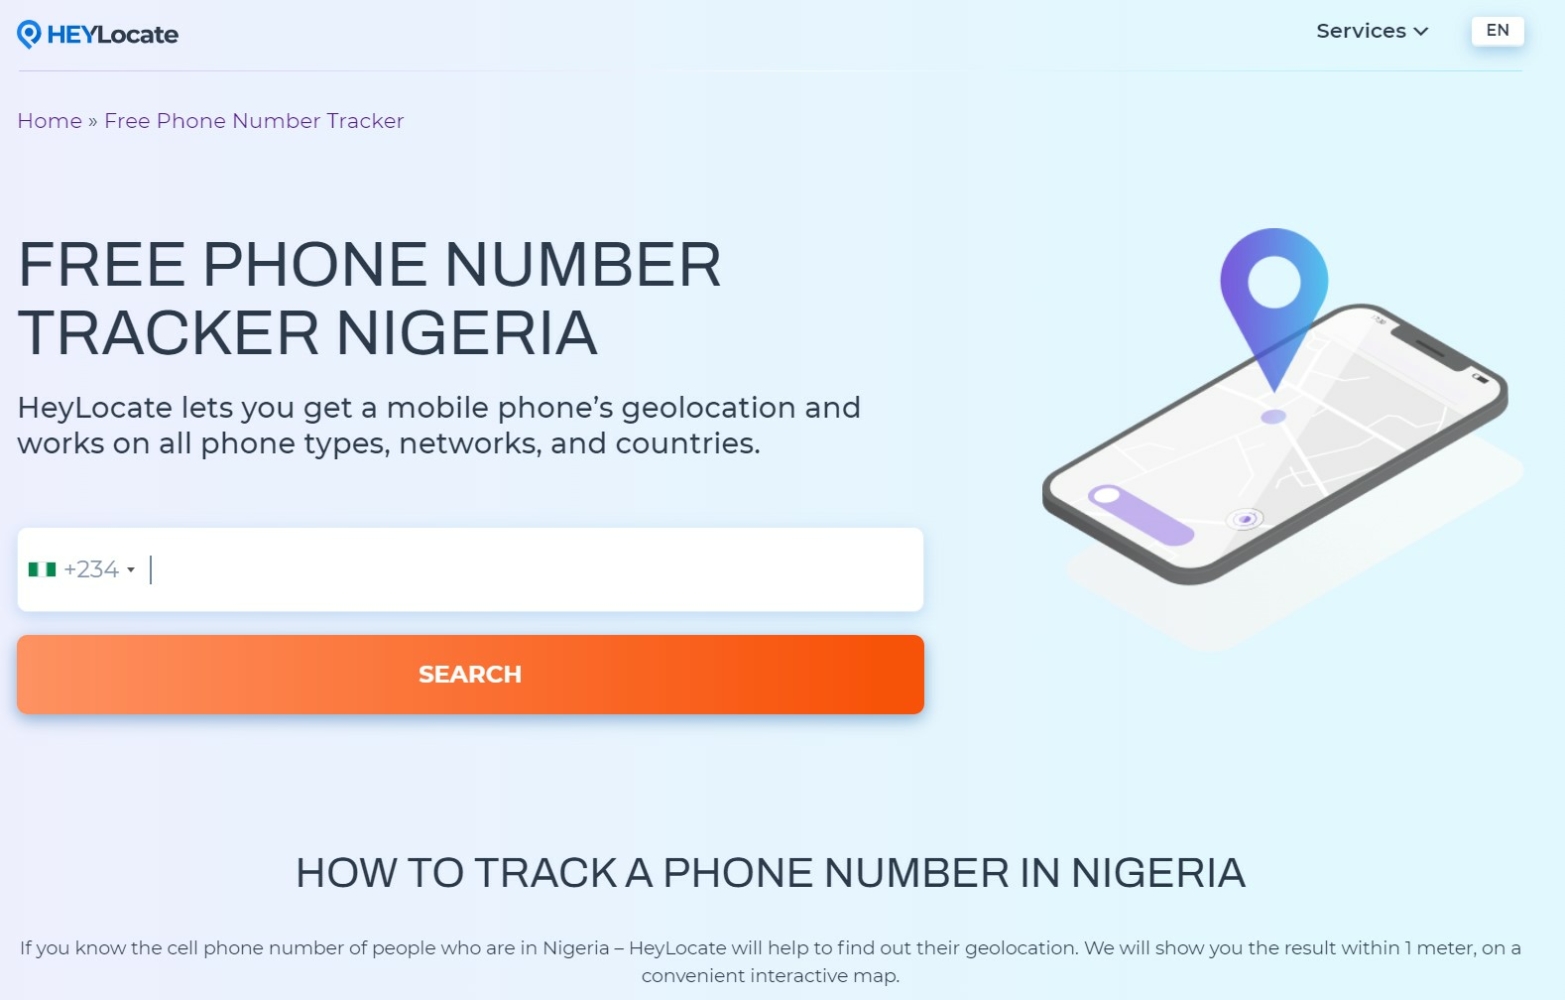 Heylocate free phone number tracker Nigeria home page with the form to type in number and find the location for free